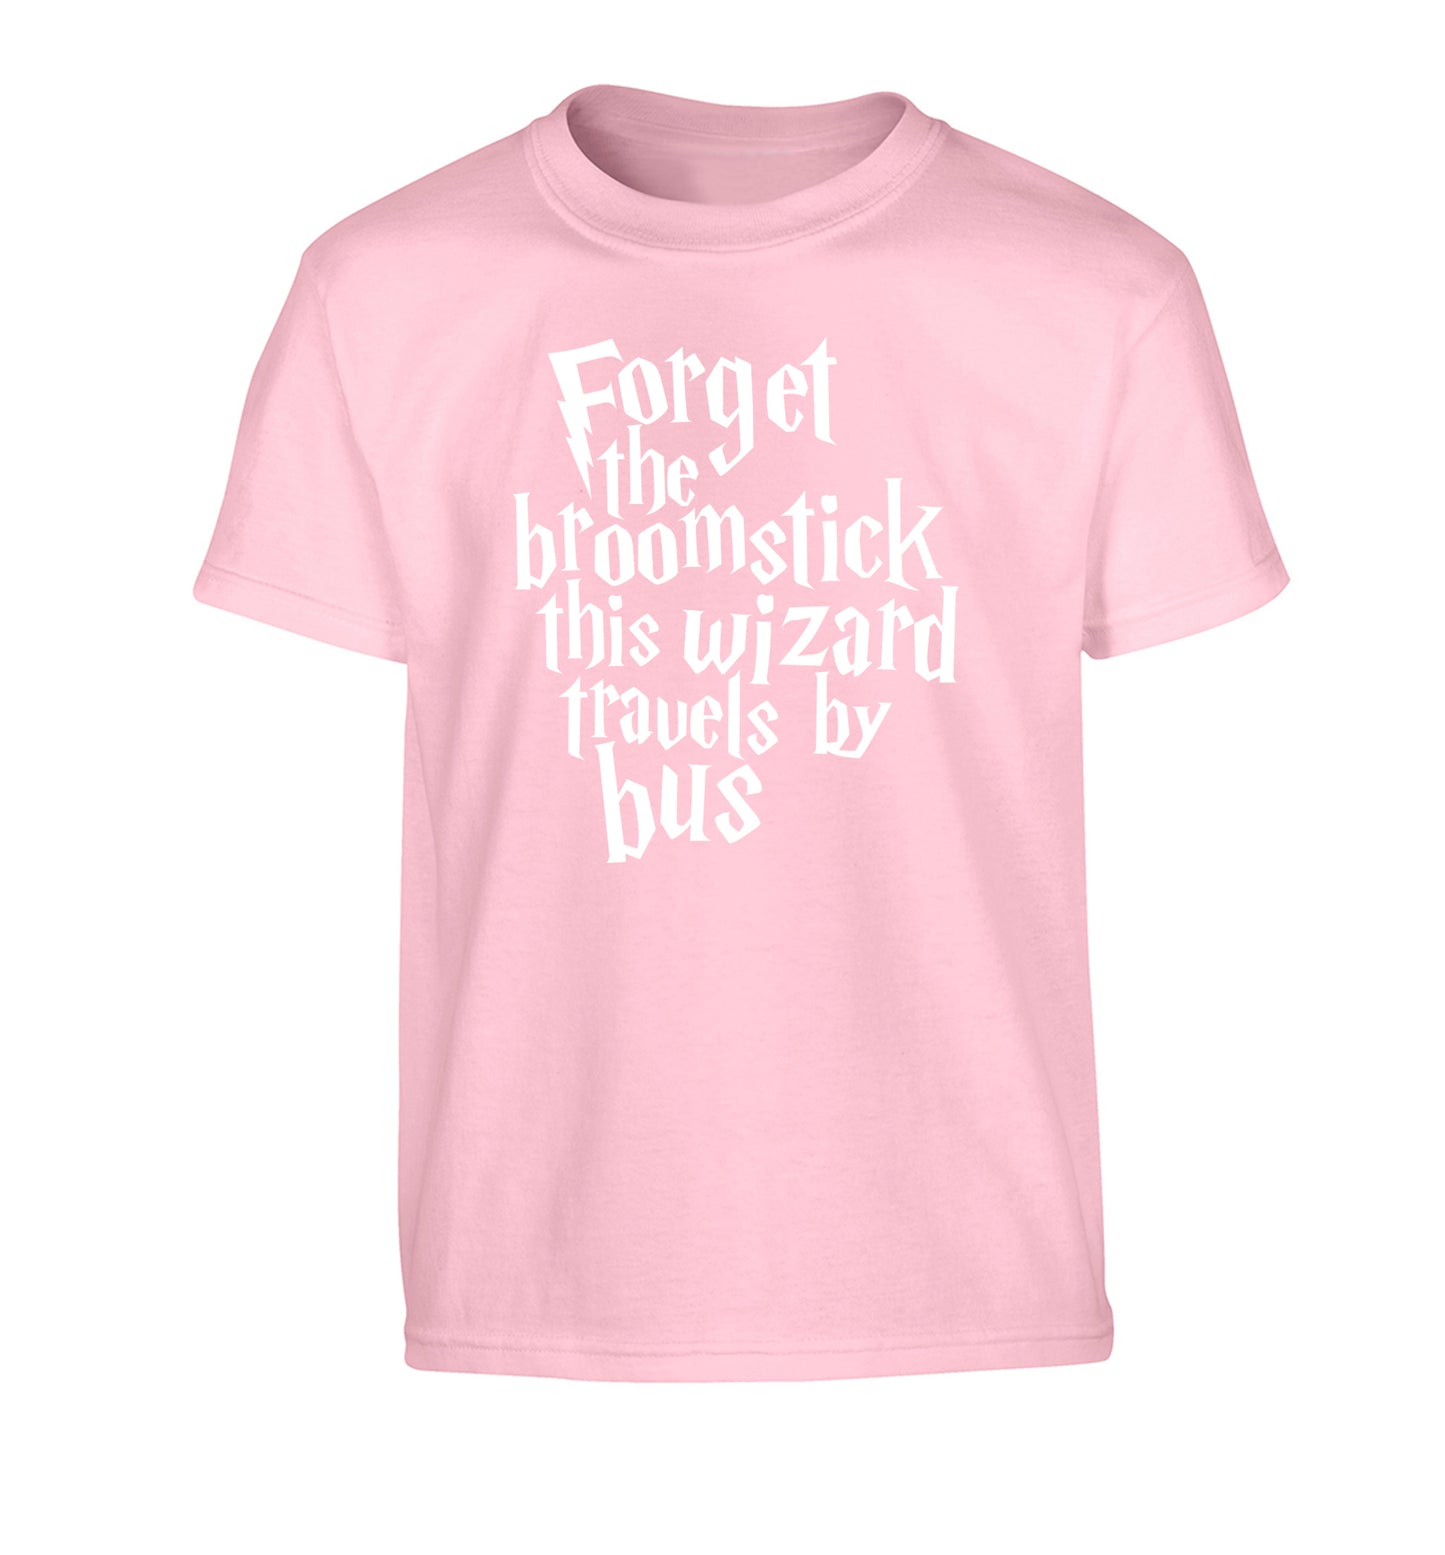 Forget the broomstick this wizard travels by bus Children's light pink Tshirt 12-14 Years